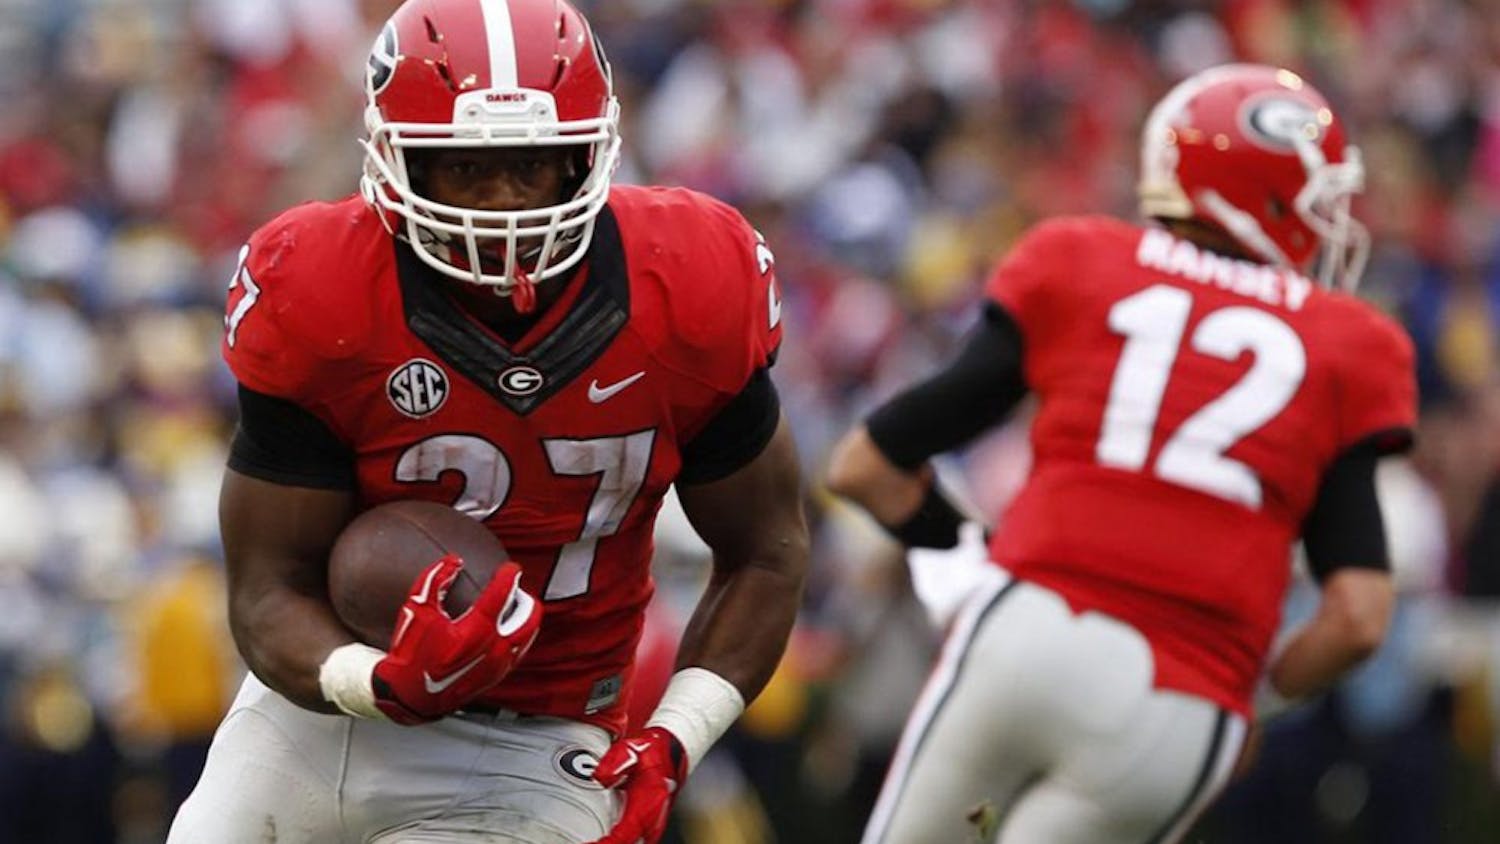 Georgia running back, Nick Chubb (27) turns to carry the ball upfield after receiving a handoff. Photo Courtesy of Joshua L. Jones of&nbsp;The Red and Black.&nbsp;